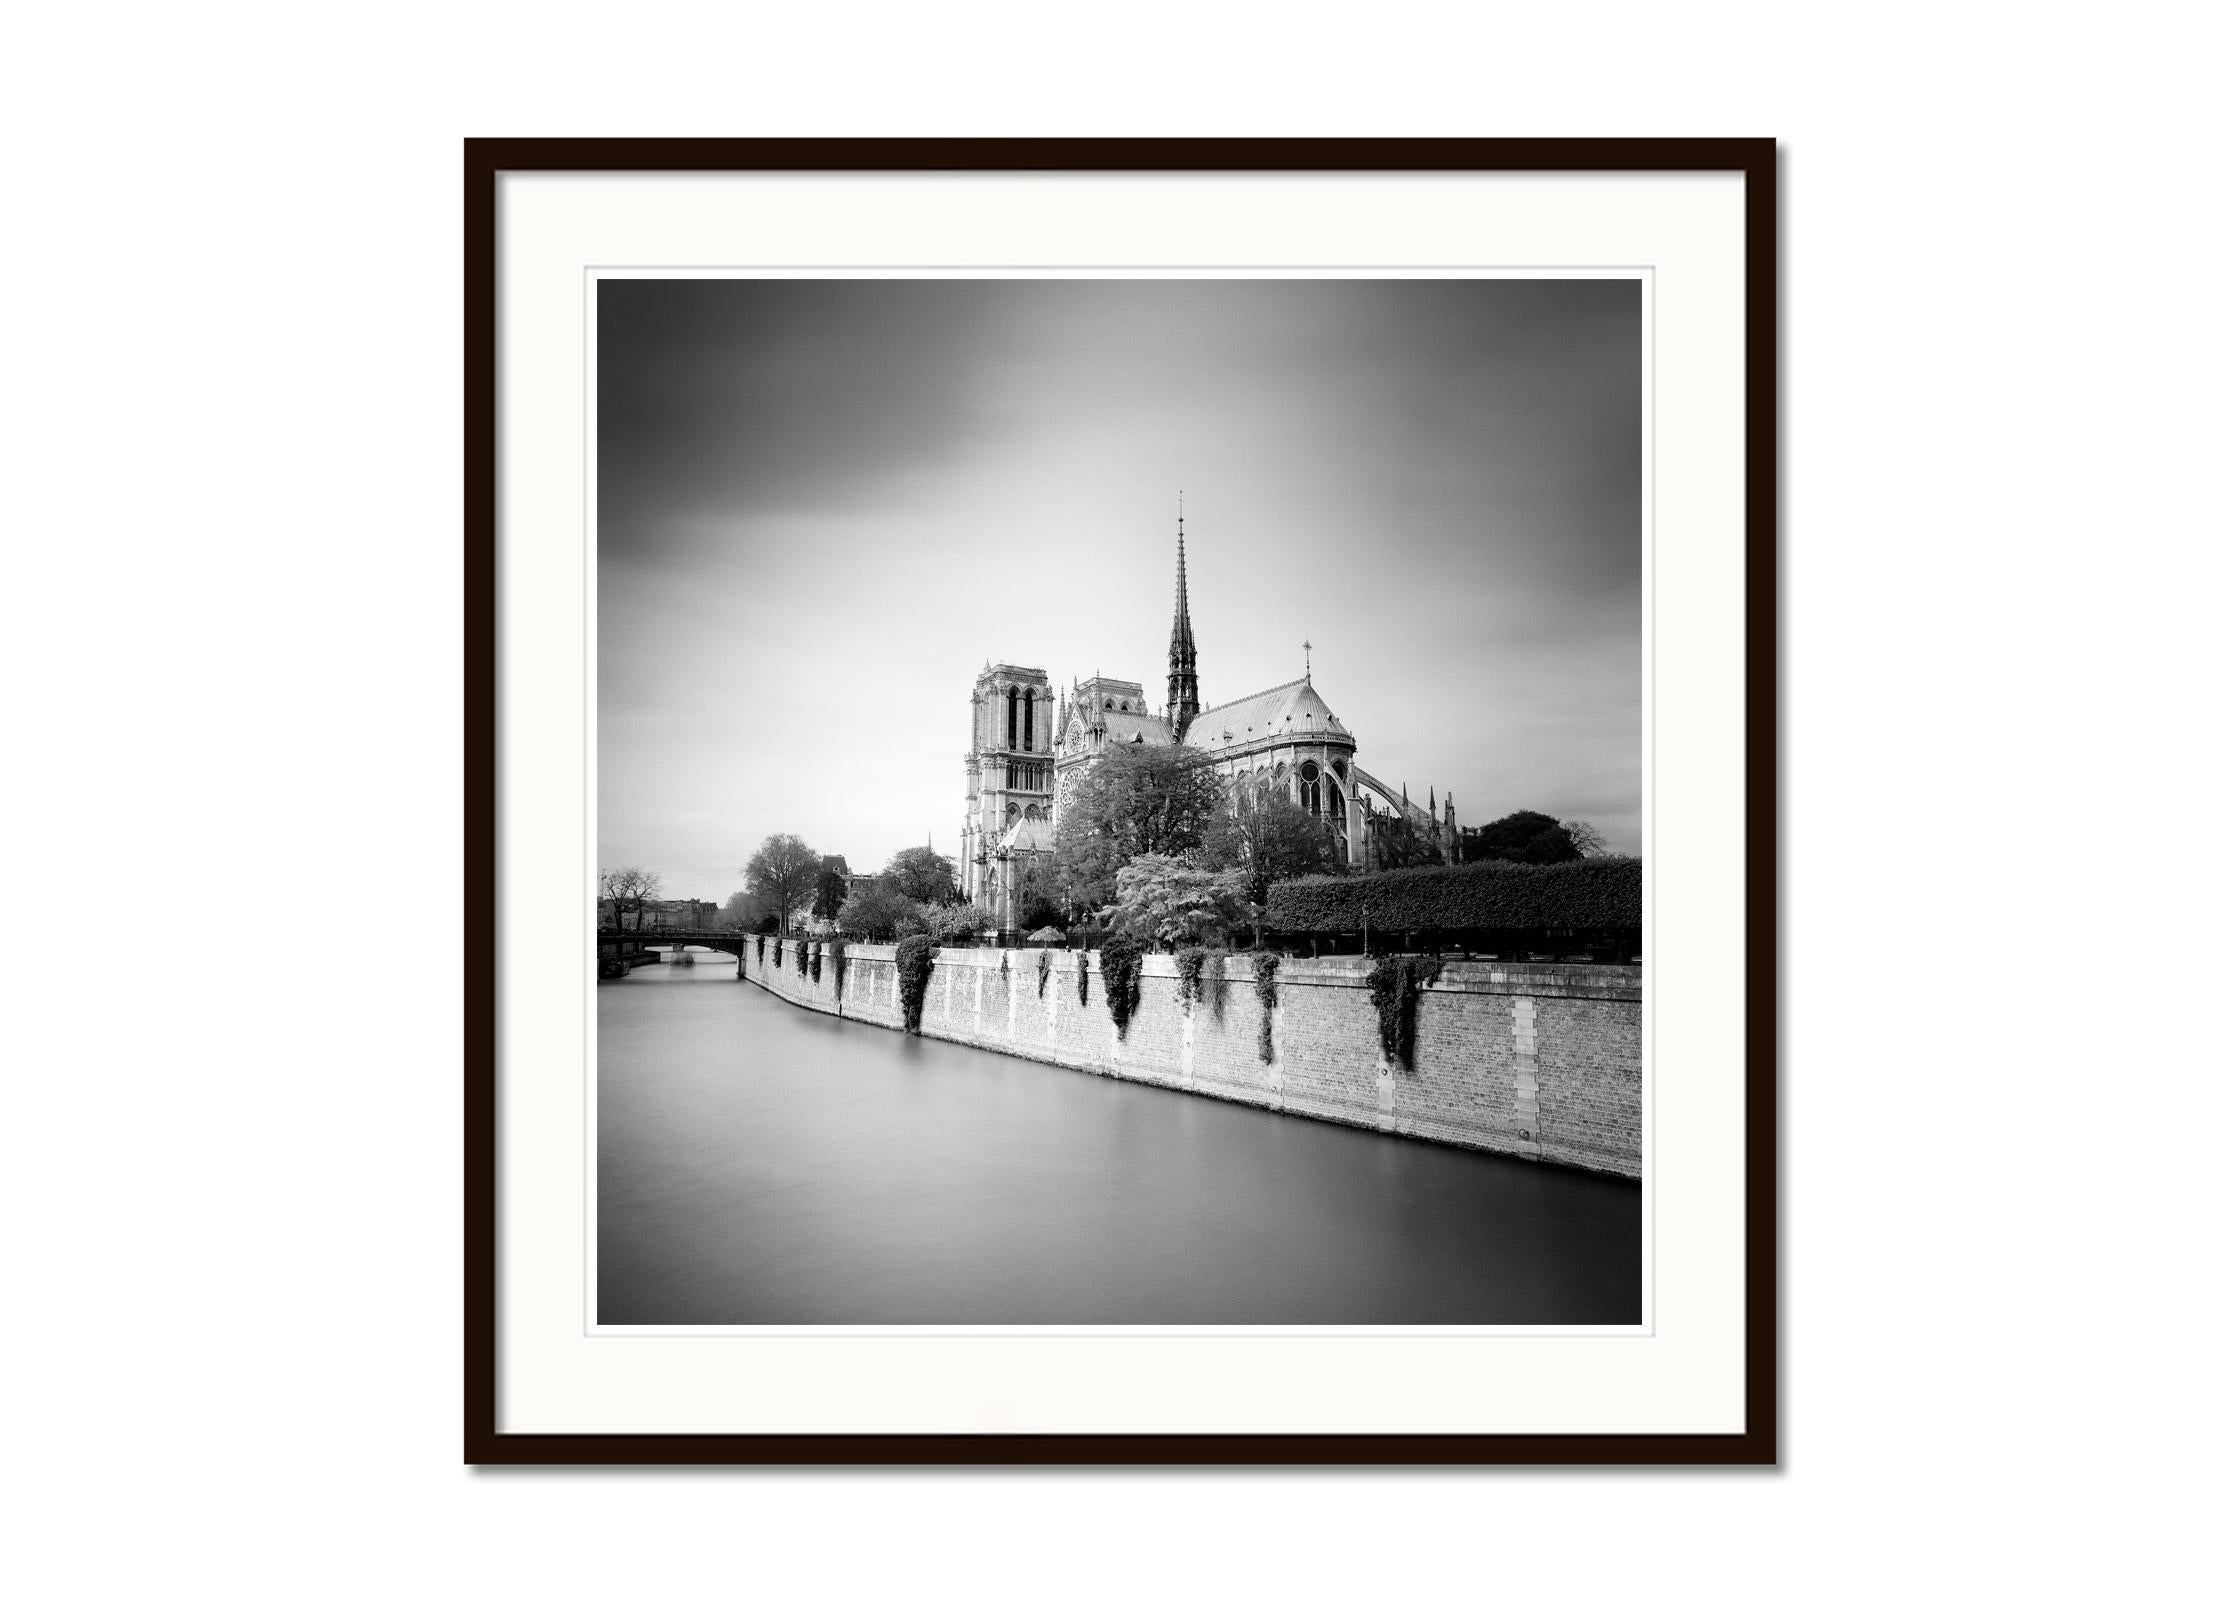 Notre Dame, Daylight, Seine, Paris France, black and white landscape photography - Abstract Photograph by Gerald Berghammer